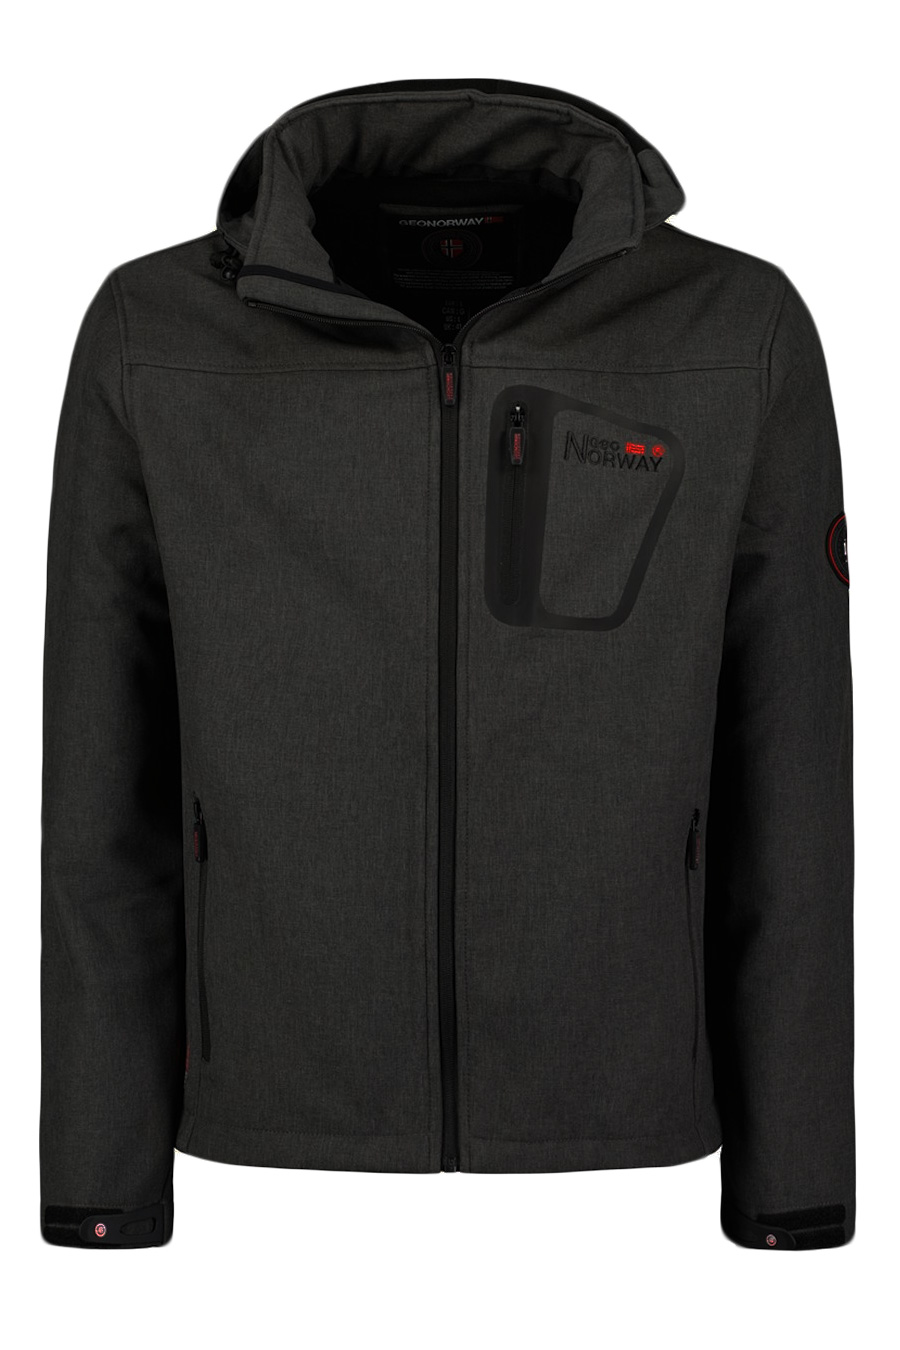 Jacket GEOGRAPHICAL NORWAY TEXSHELL-Dark-Grey